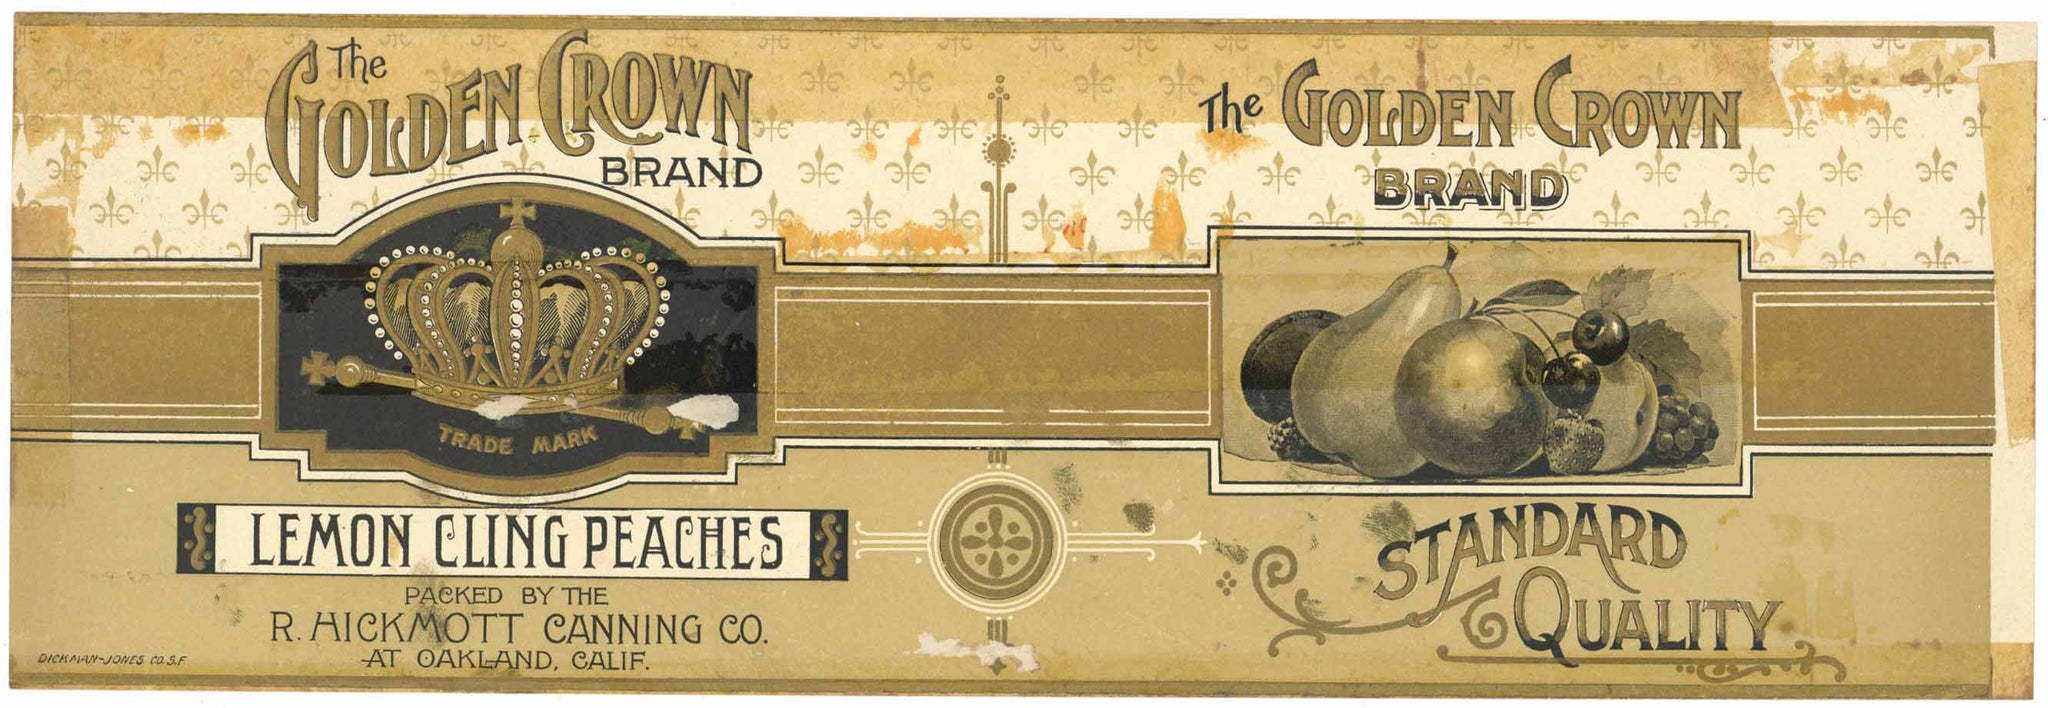 The Golden Crown Brand Vintage Peach Can Label